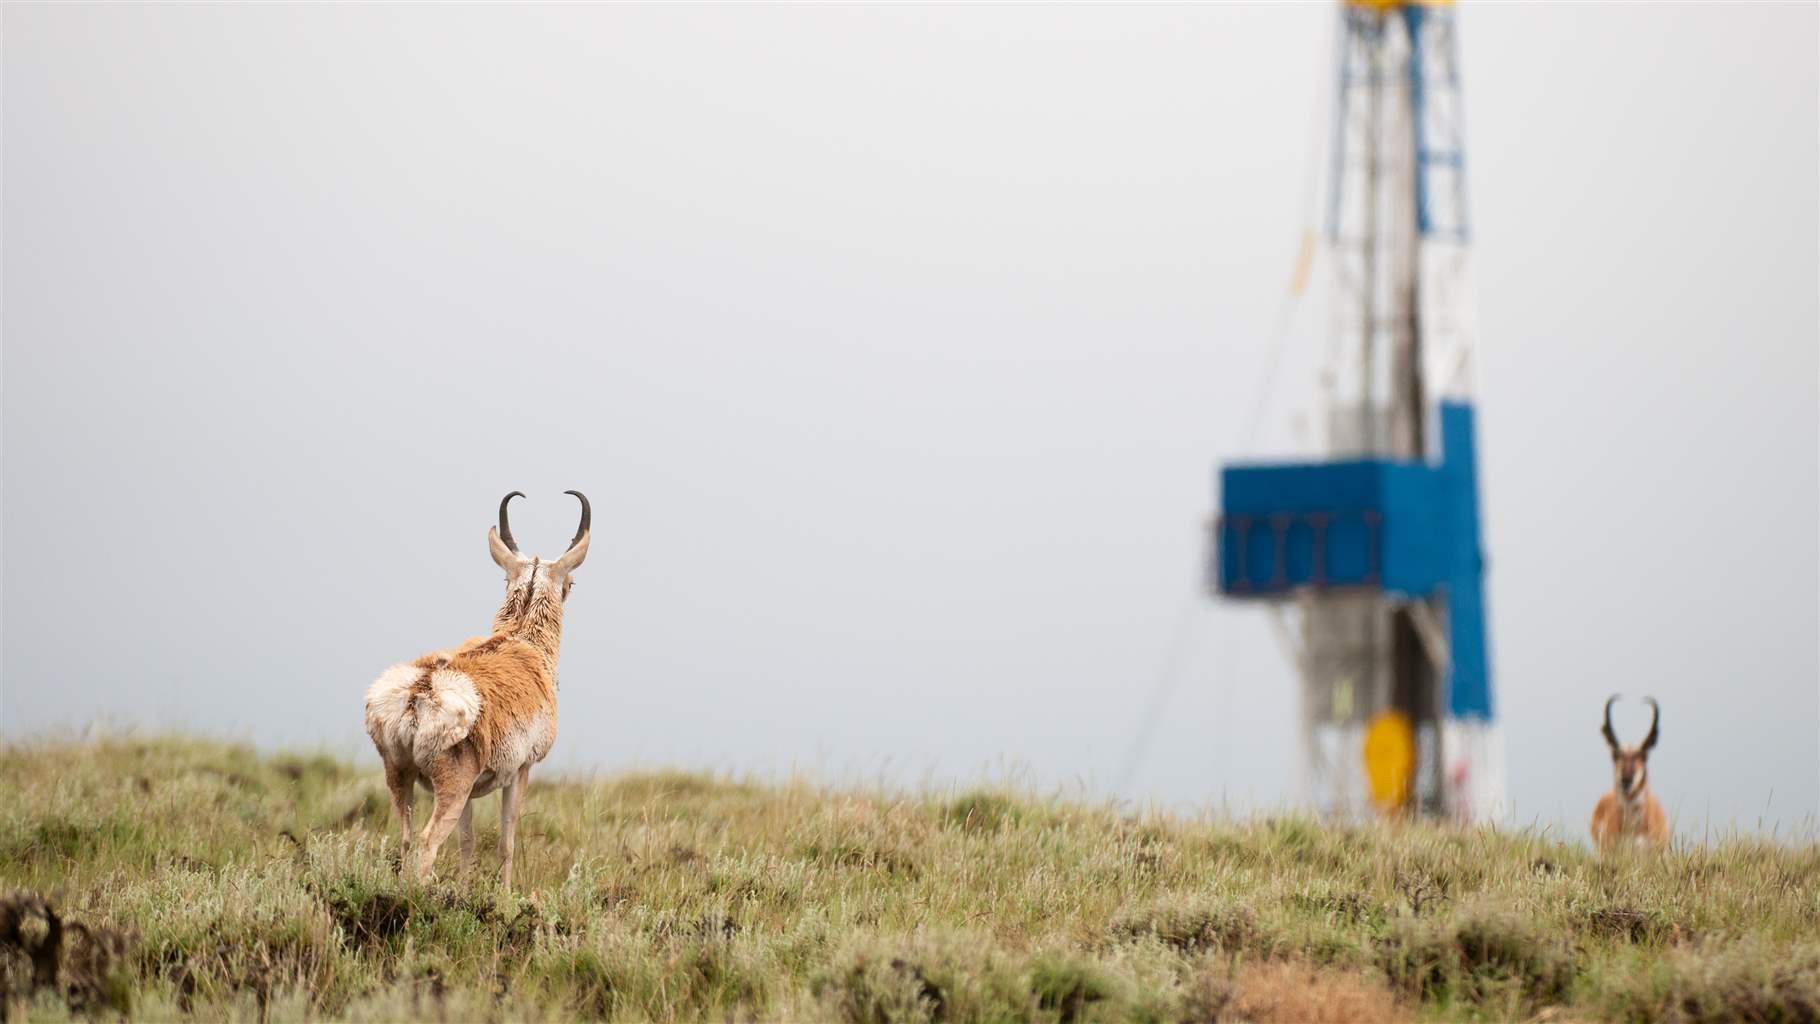 Two pronghorn stand on a grassy field, facing away from the camera. A tall blue-and-yellow drill rig stands toward the right, beyond the animals.